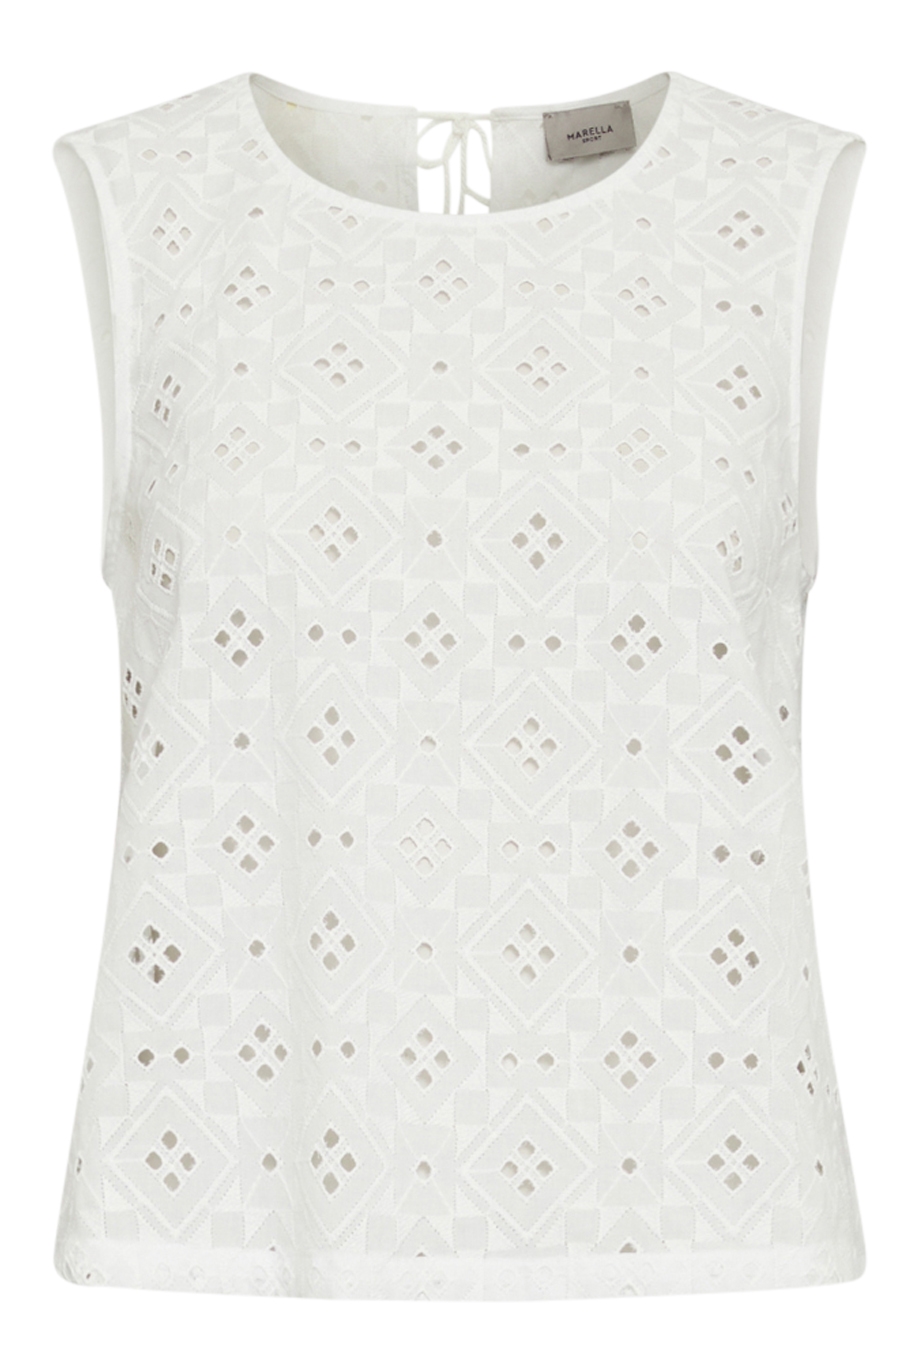 Marella Broderie anglaise top - Harvey Nichols